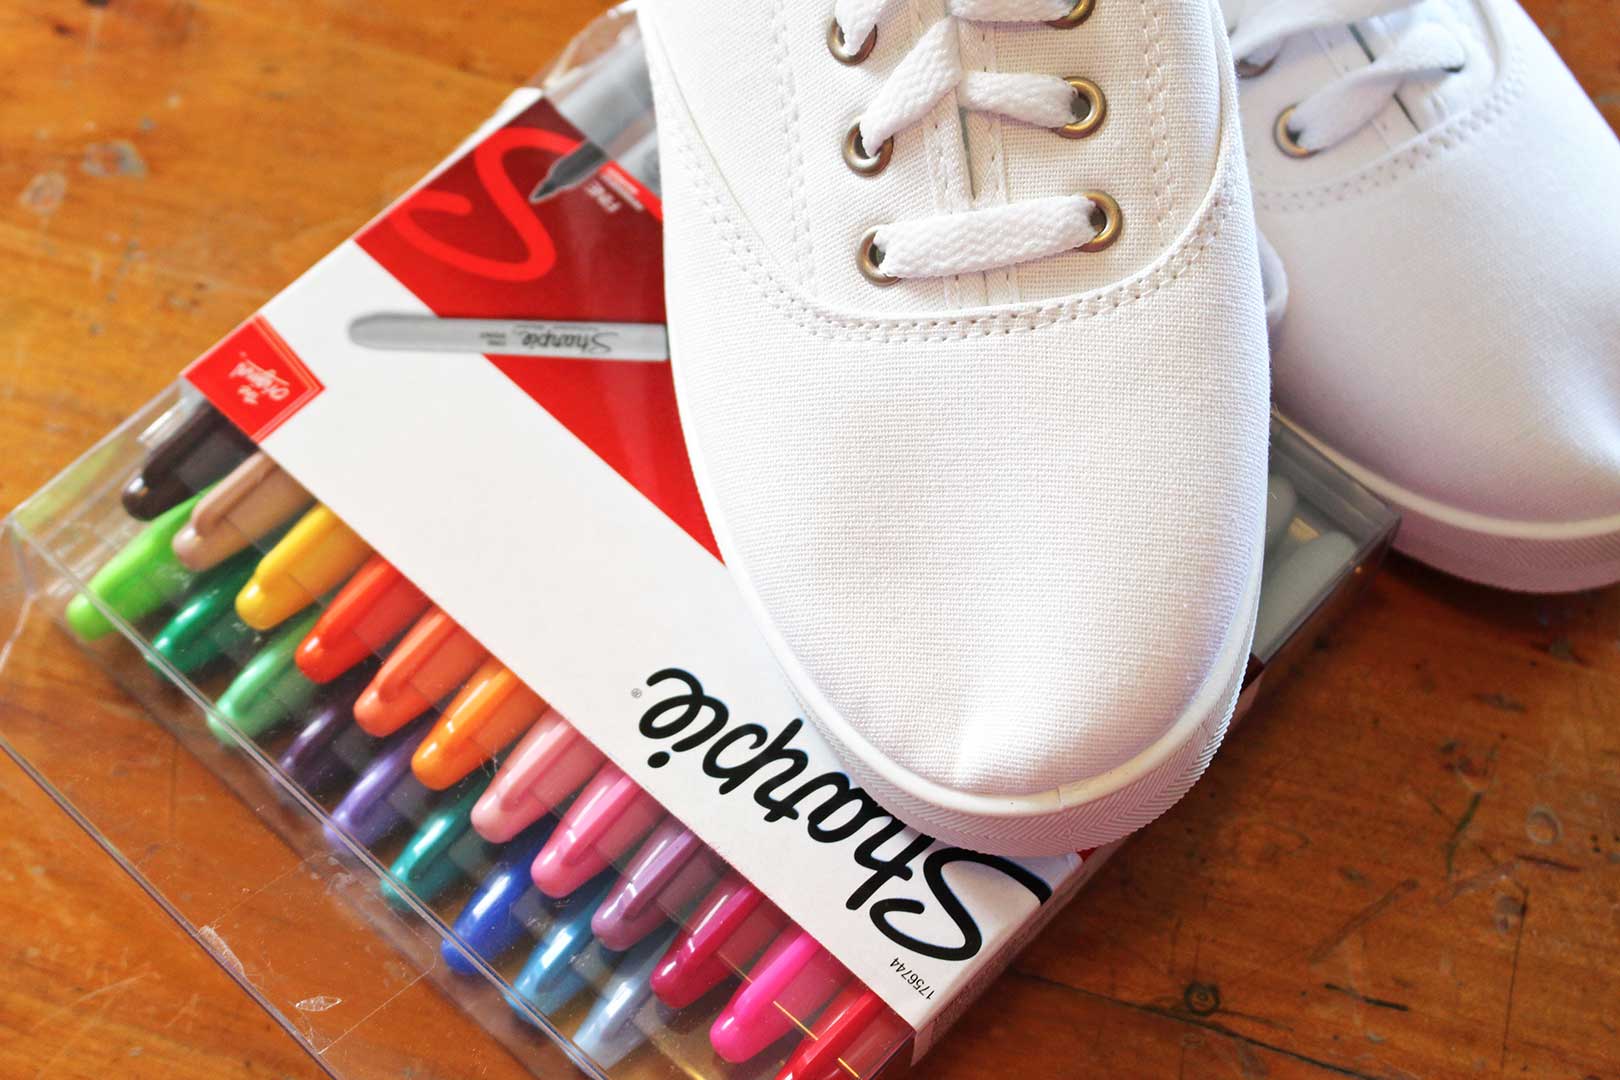 Using a Sharpie Paint Pen to Make Sneakers Look New Again!